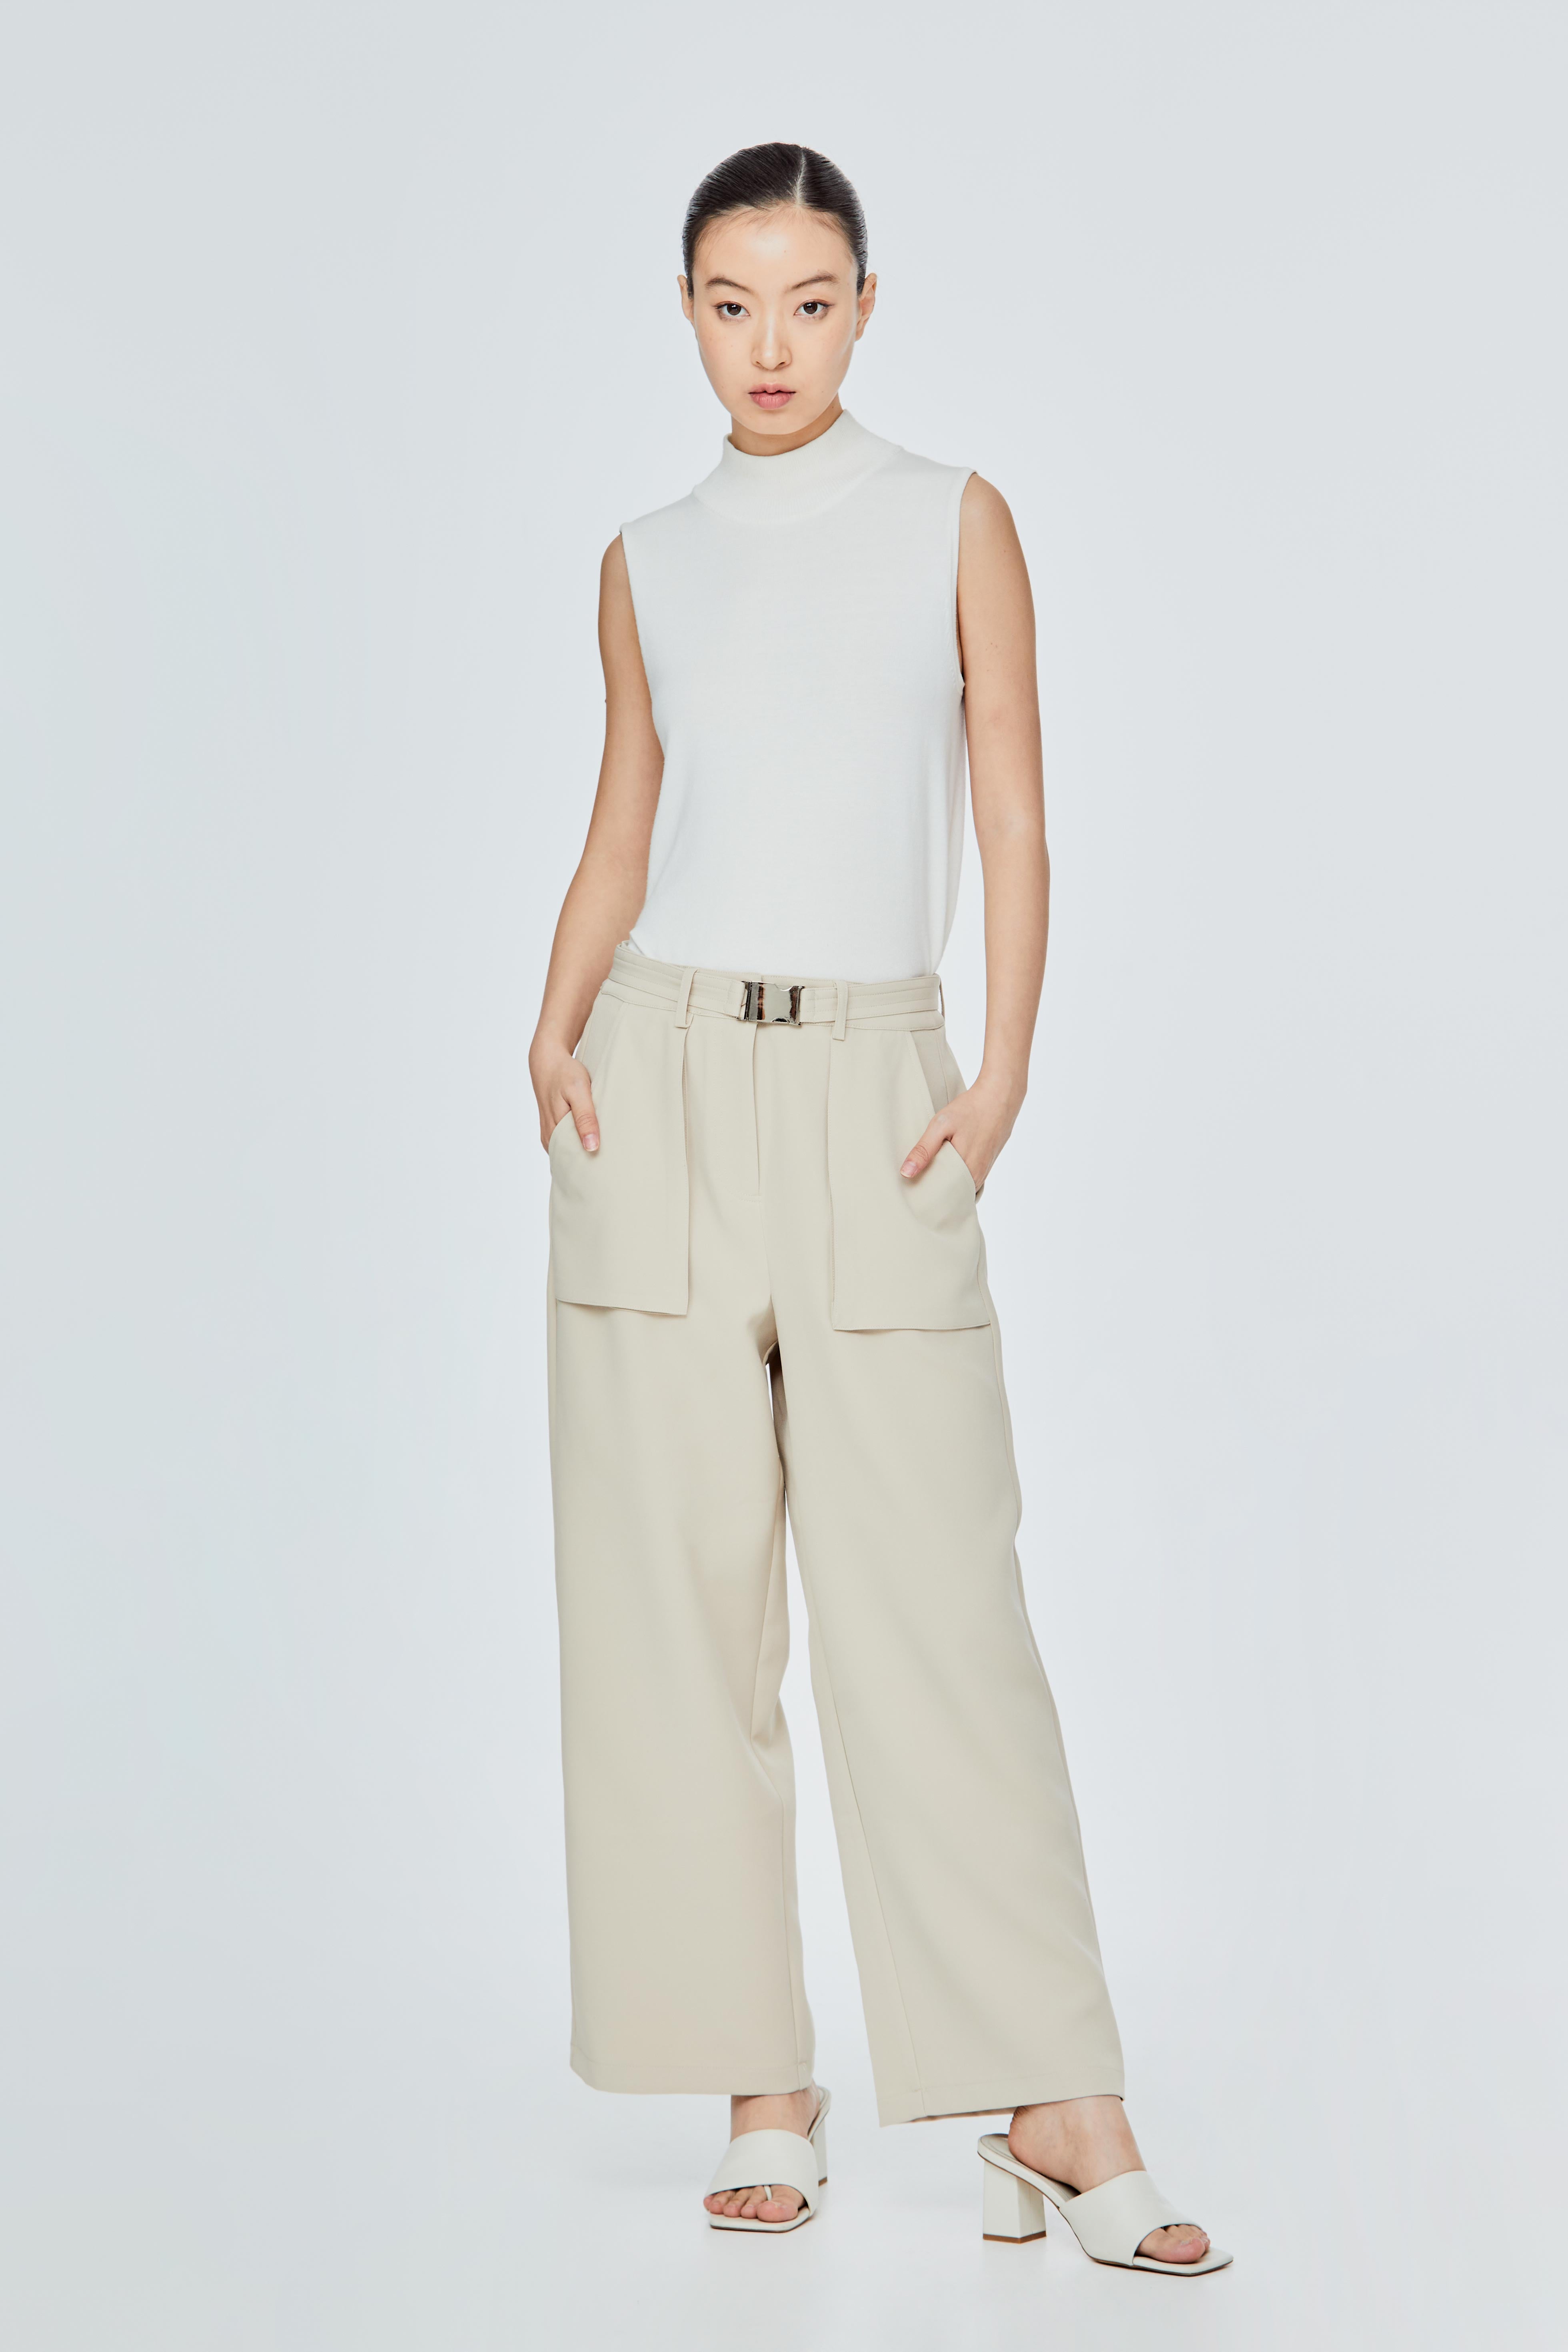 Buckled Straight Cut Pants